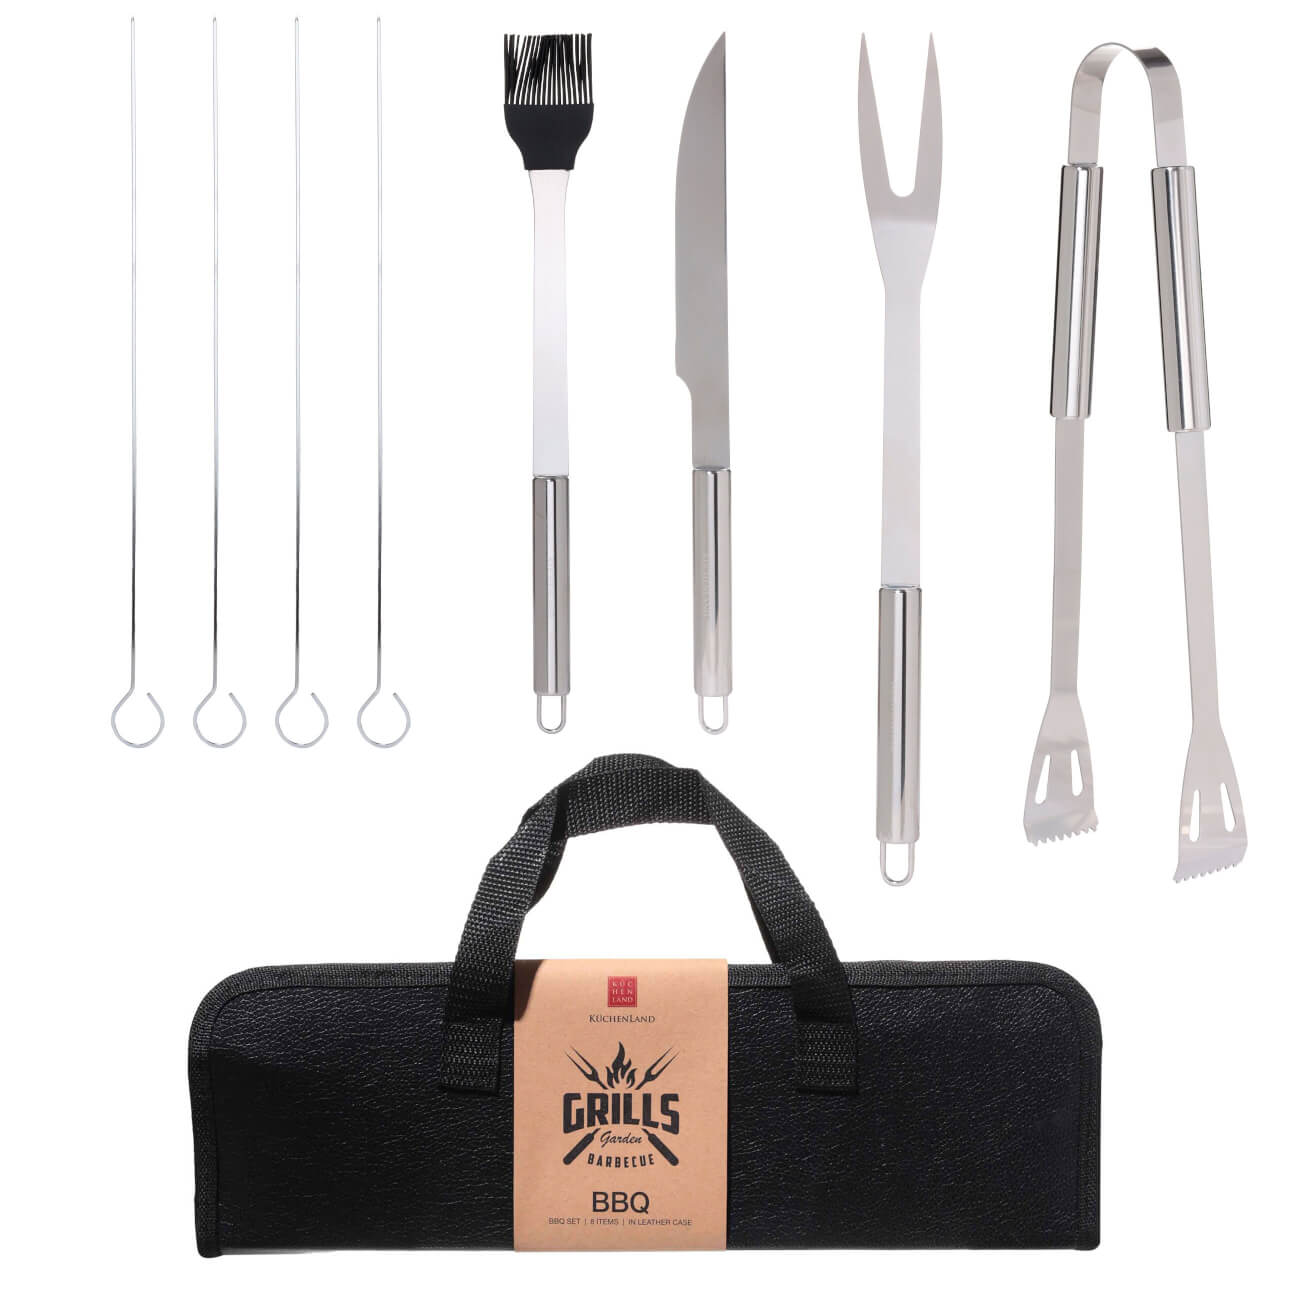 BBQ set, 8 pcs, in a leather case, steel / silicone / eco-leather, BBQ изображение № 1